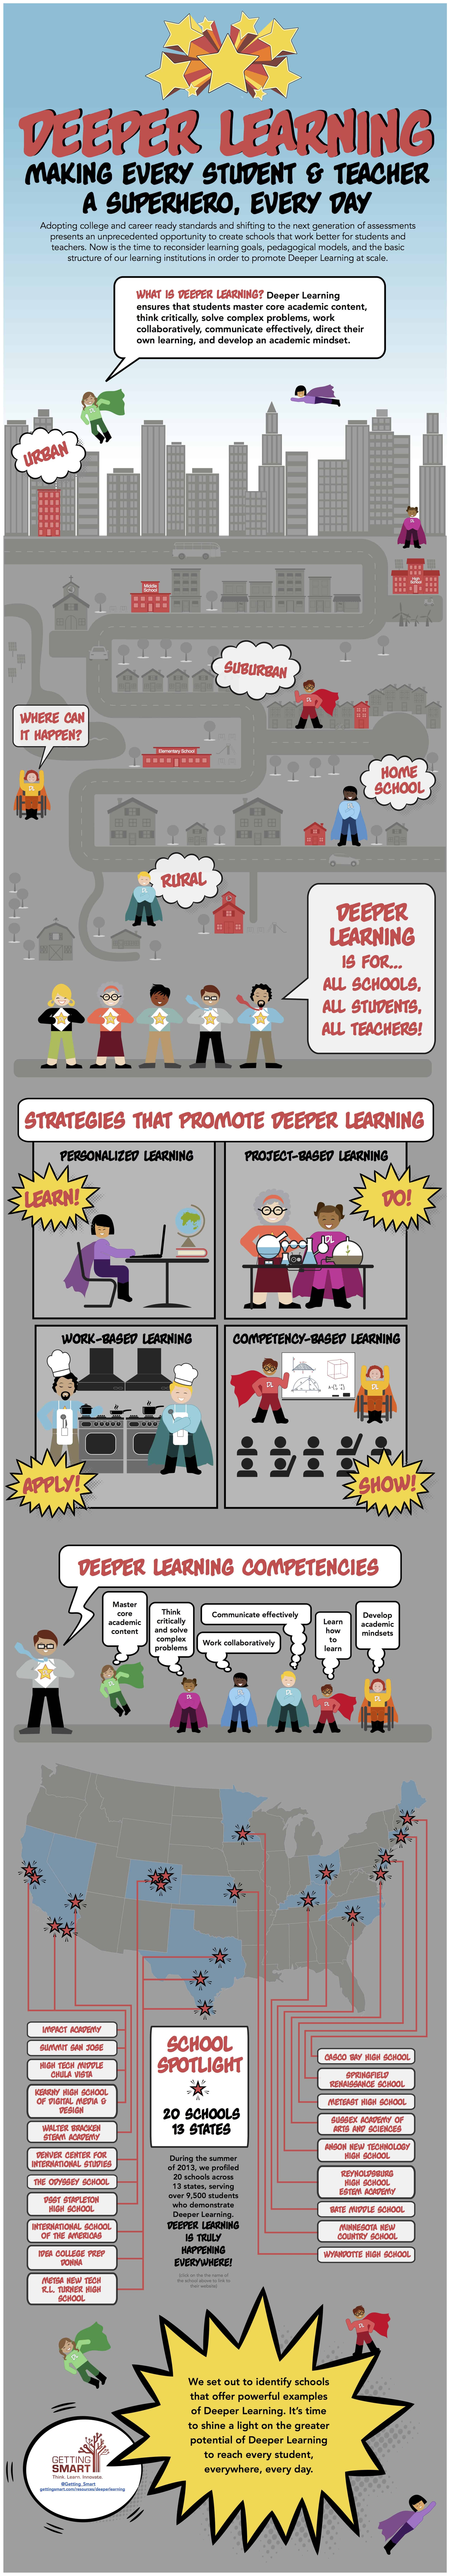 FINAL - Deeper Learning Infographic